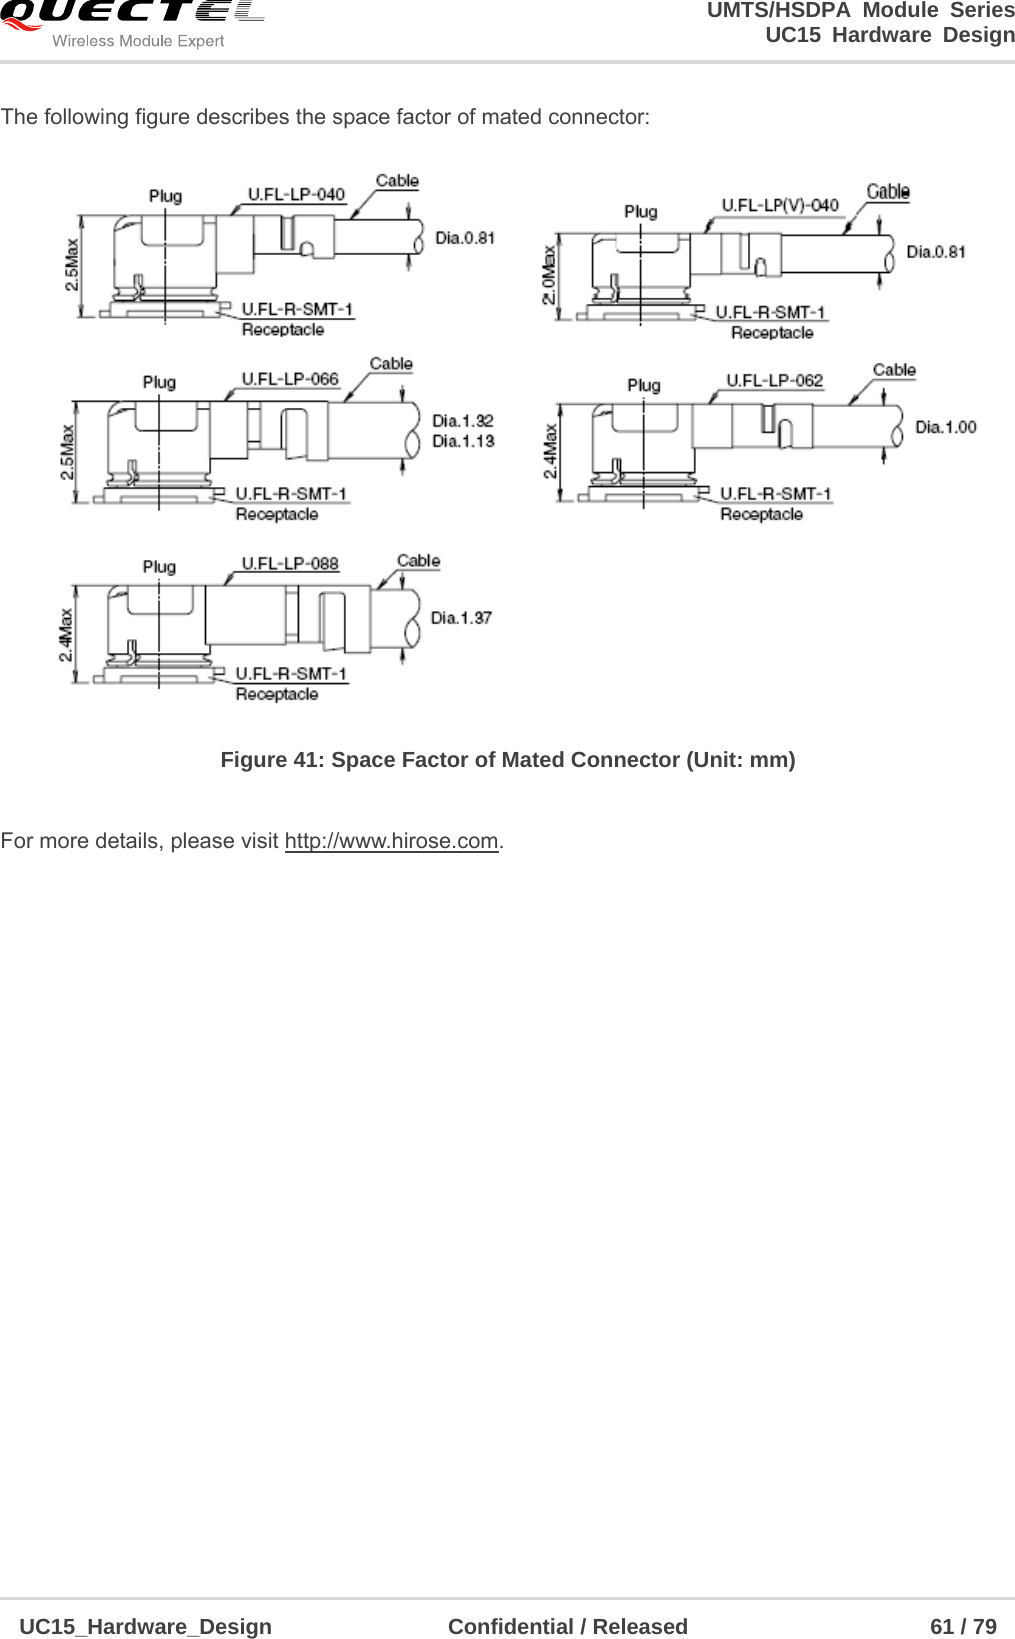                                                                        UMTS/HSDPA Module Series                                                                 UC15 Hardware Design  UC15_Hardware_Design                Confidential / Released                      61 / 79    The following figure describes the space factor of mated connector:  Figure 41: Space Factor of Mated Connector (Unit: mm)  For more details, please visit http://www.hirose.com. 